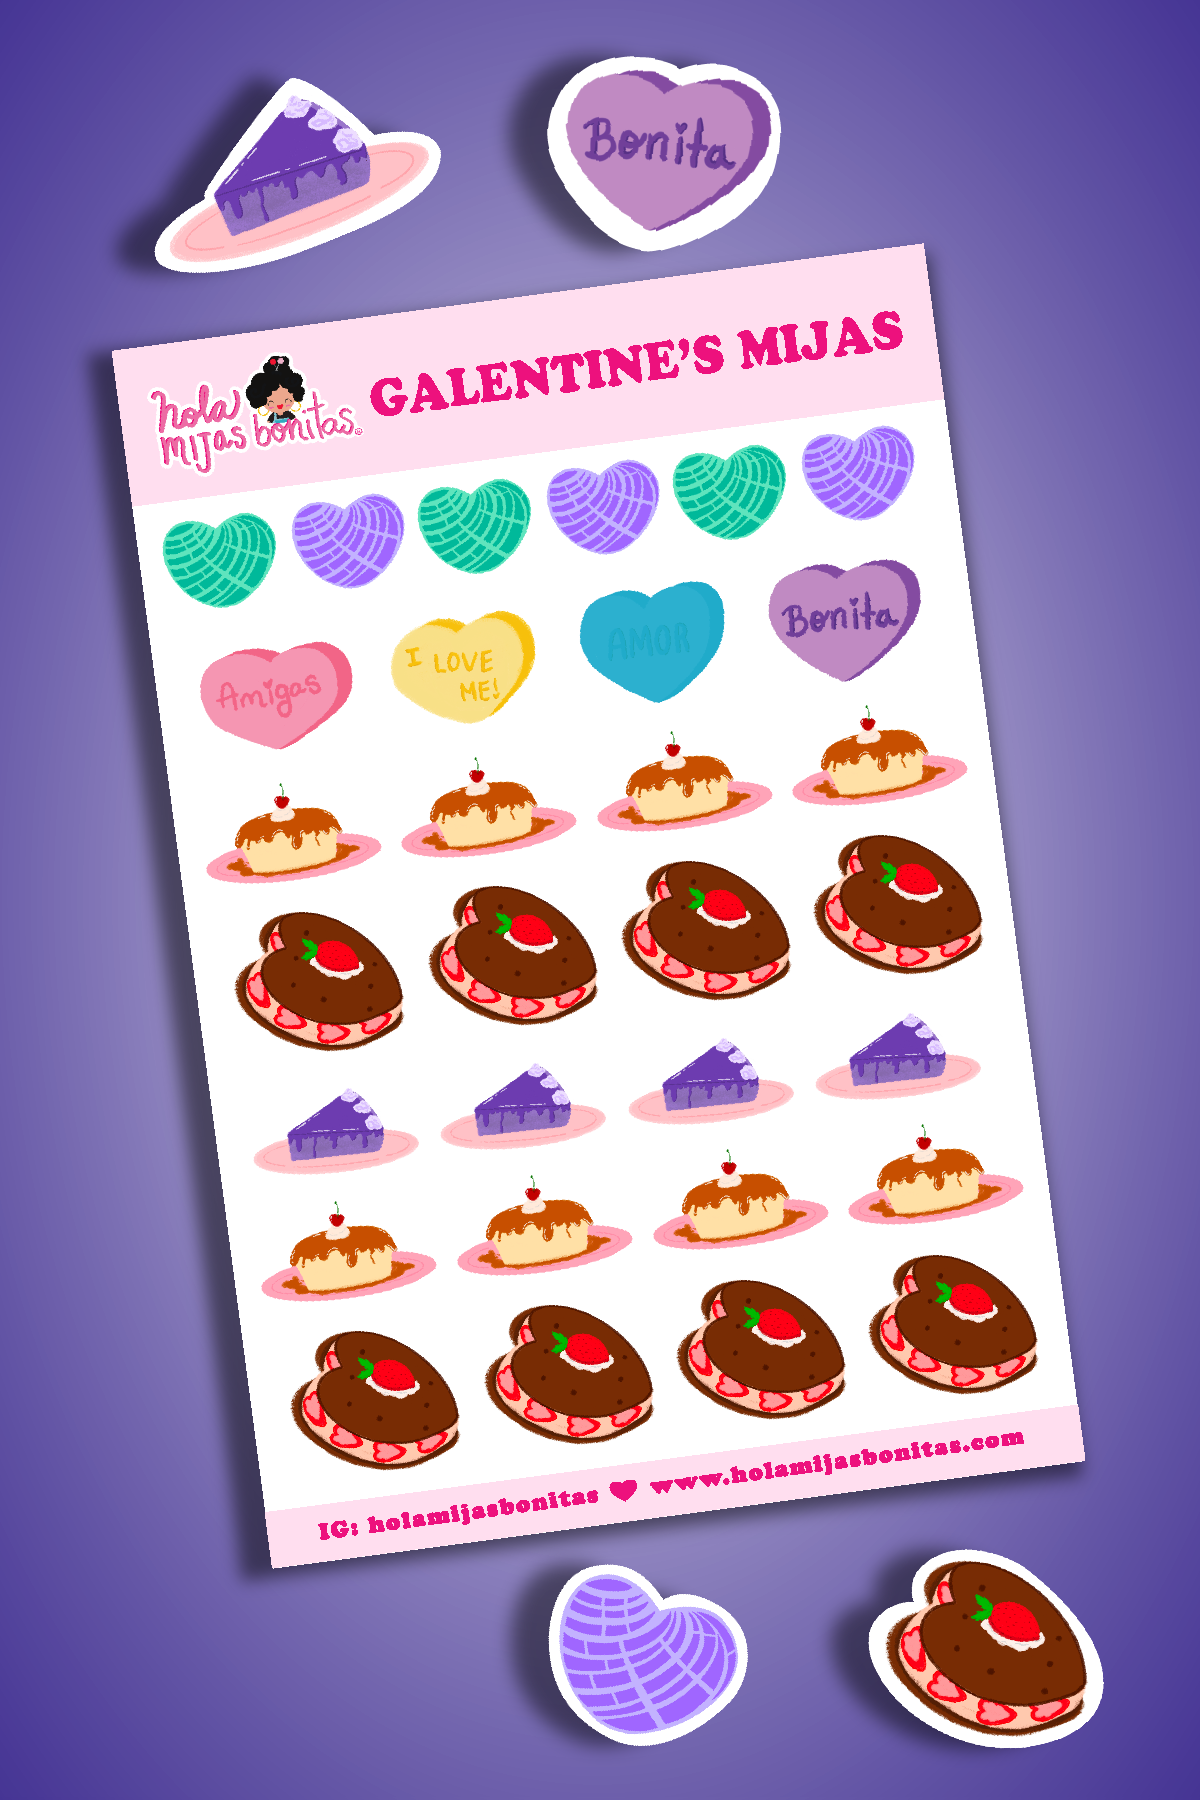 Valentines Coloring Cards & Sticker Pack